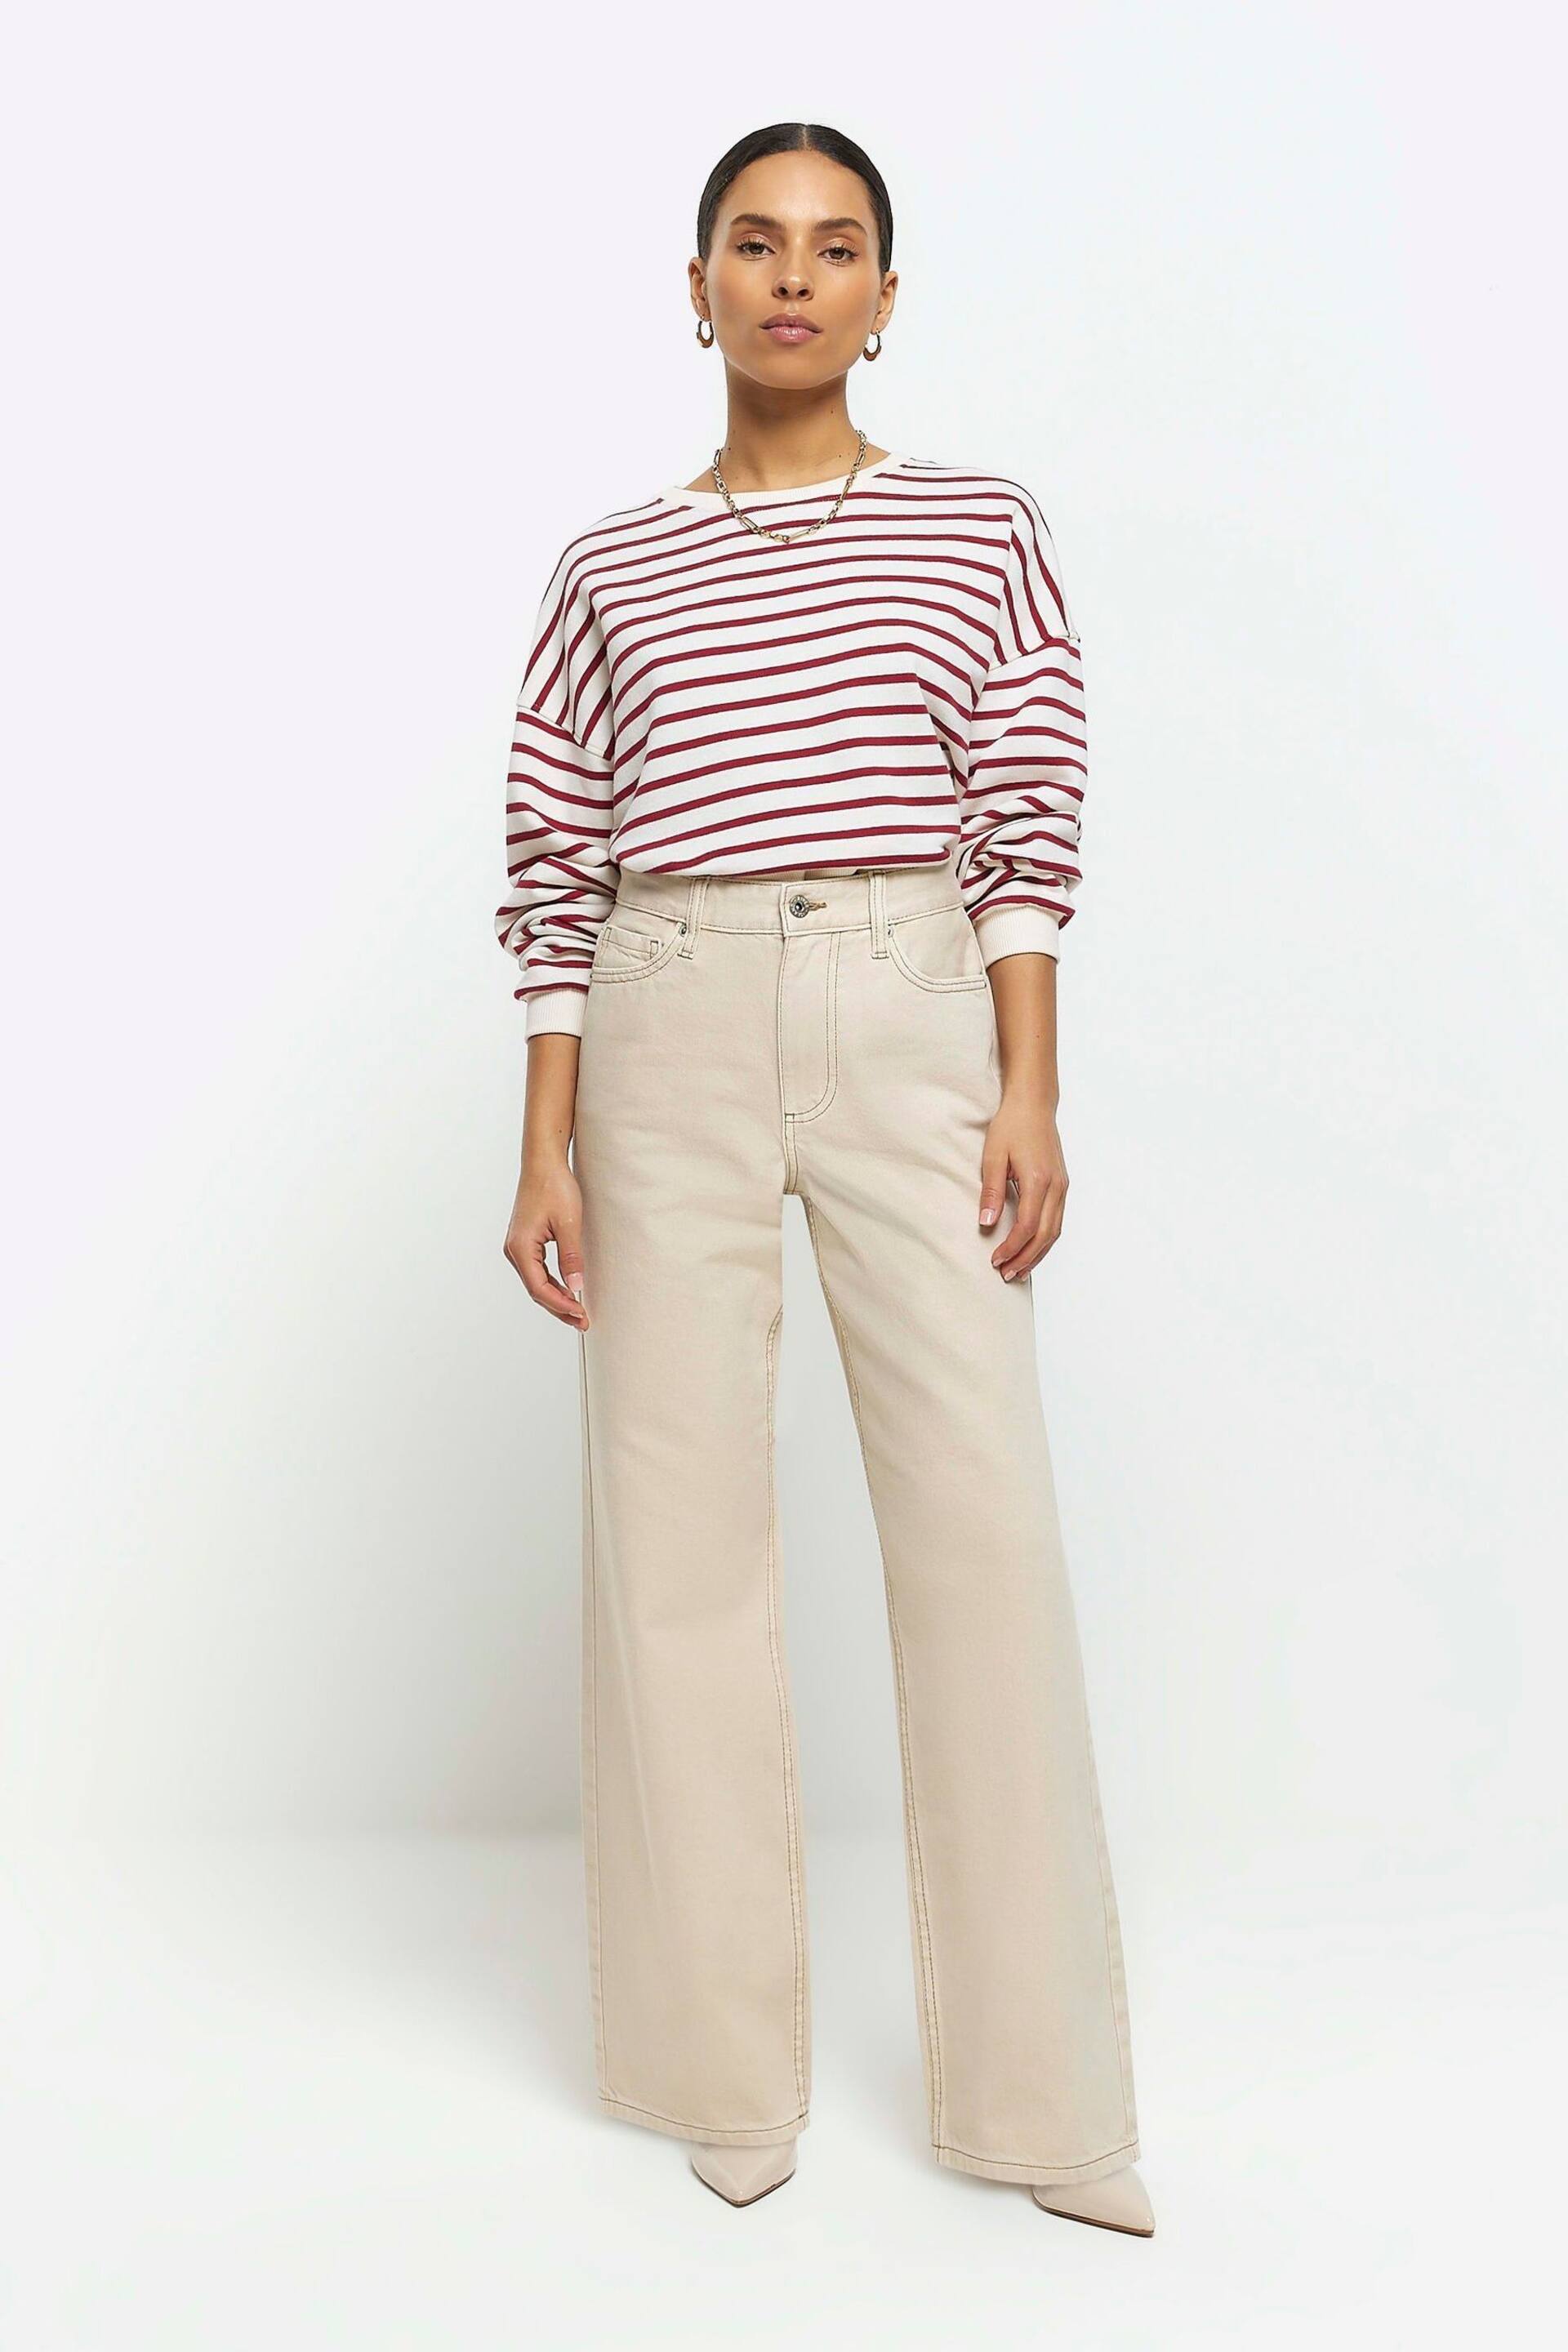 River Island Cream Petite High Rise Relaxed Straight Leg Jeans - Image 1 of 5